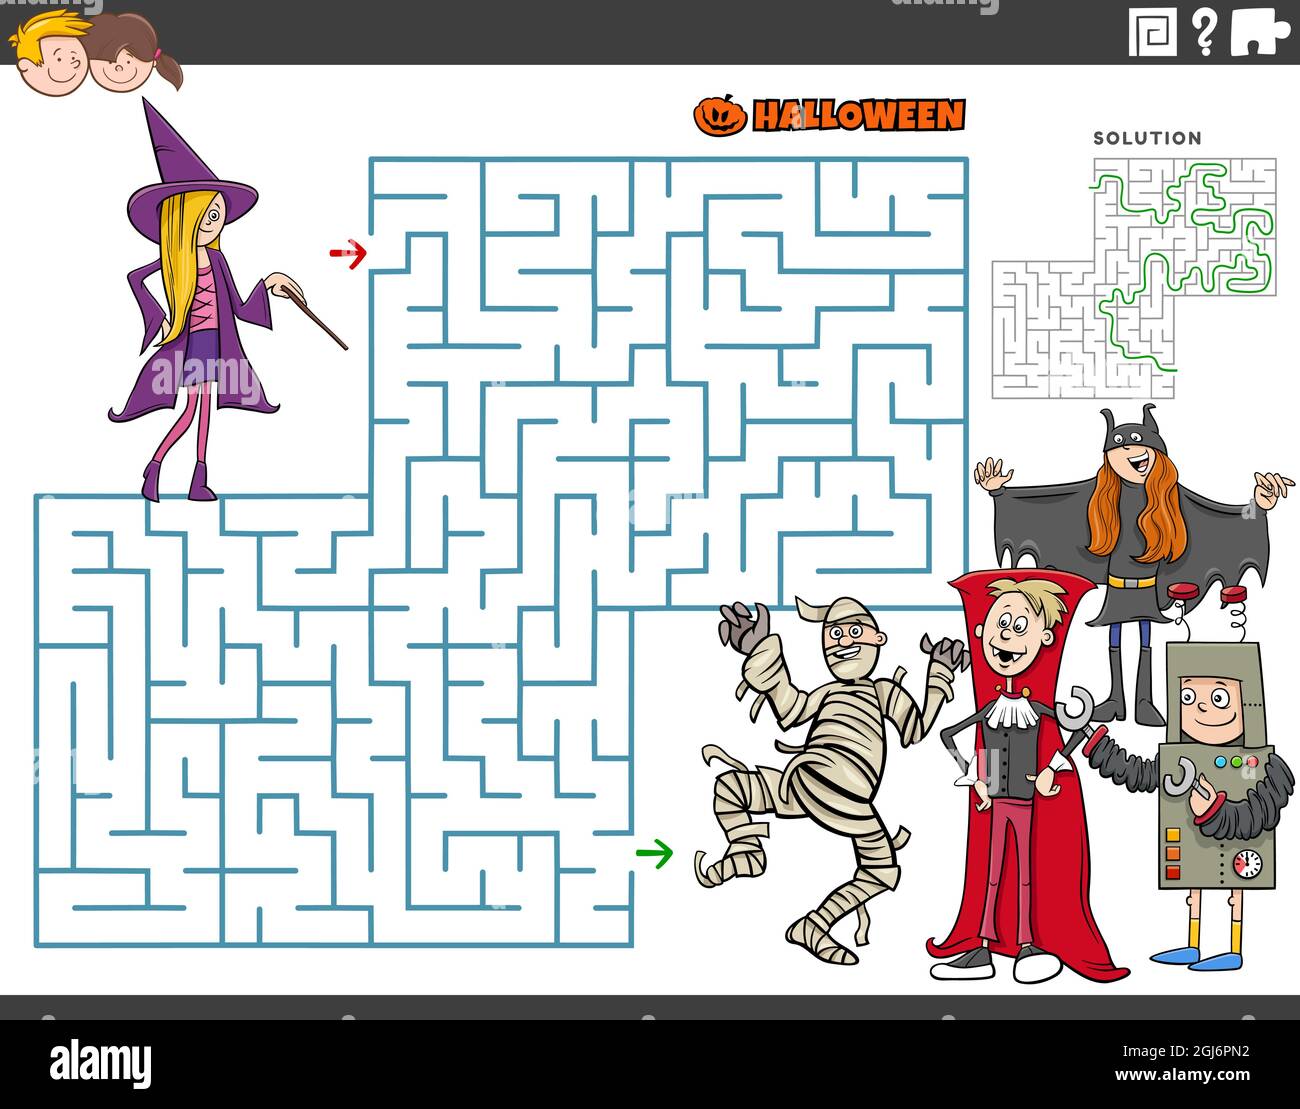 Cartoon illustration of educational maze puzzle game with kids on Halloween time Stock Vector